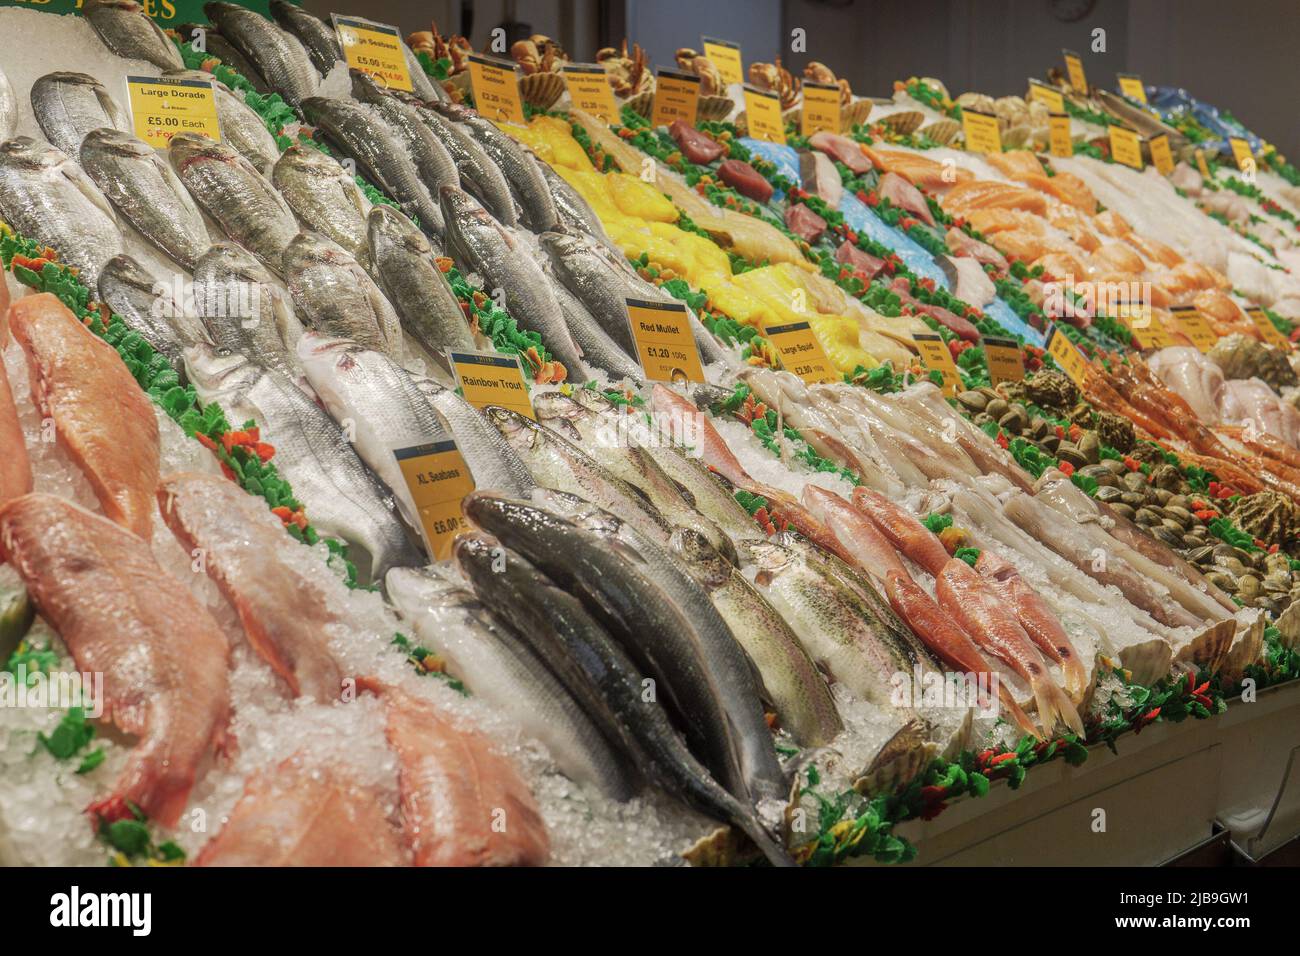 Fresh fish on ice at a fishmongers counter in the fish market in Leeds. Stock Photo